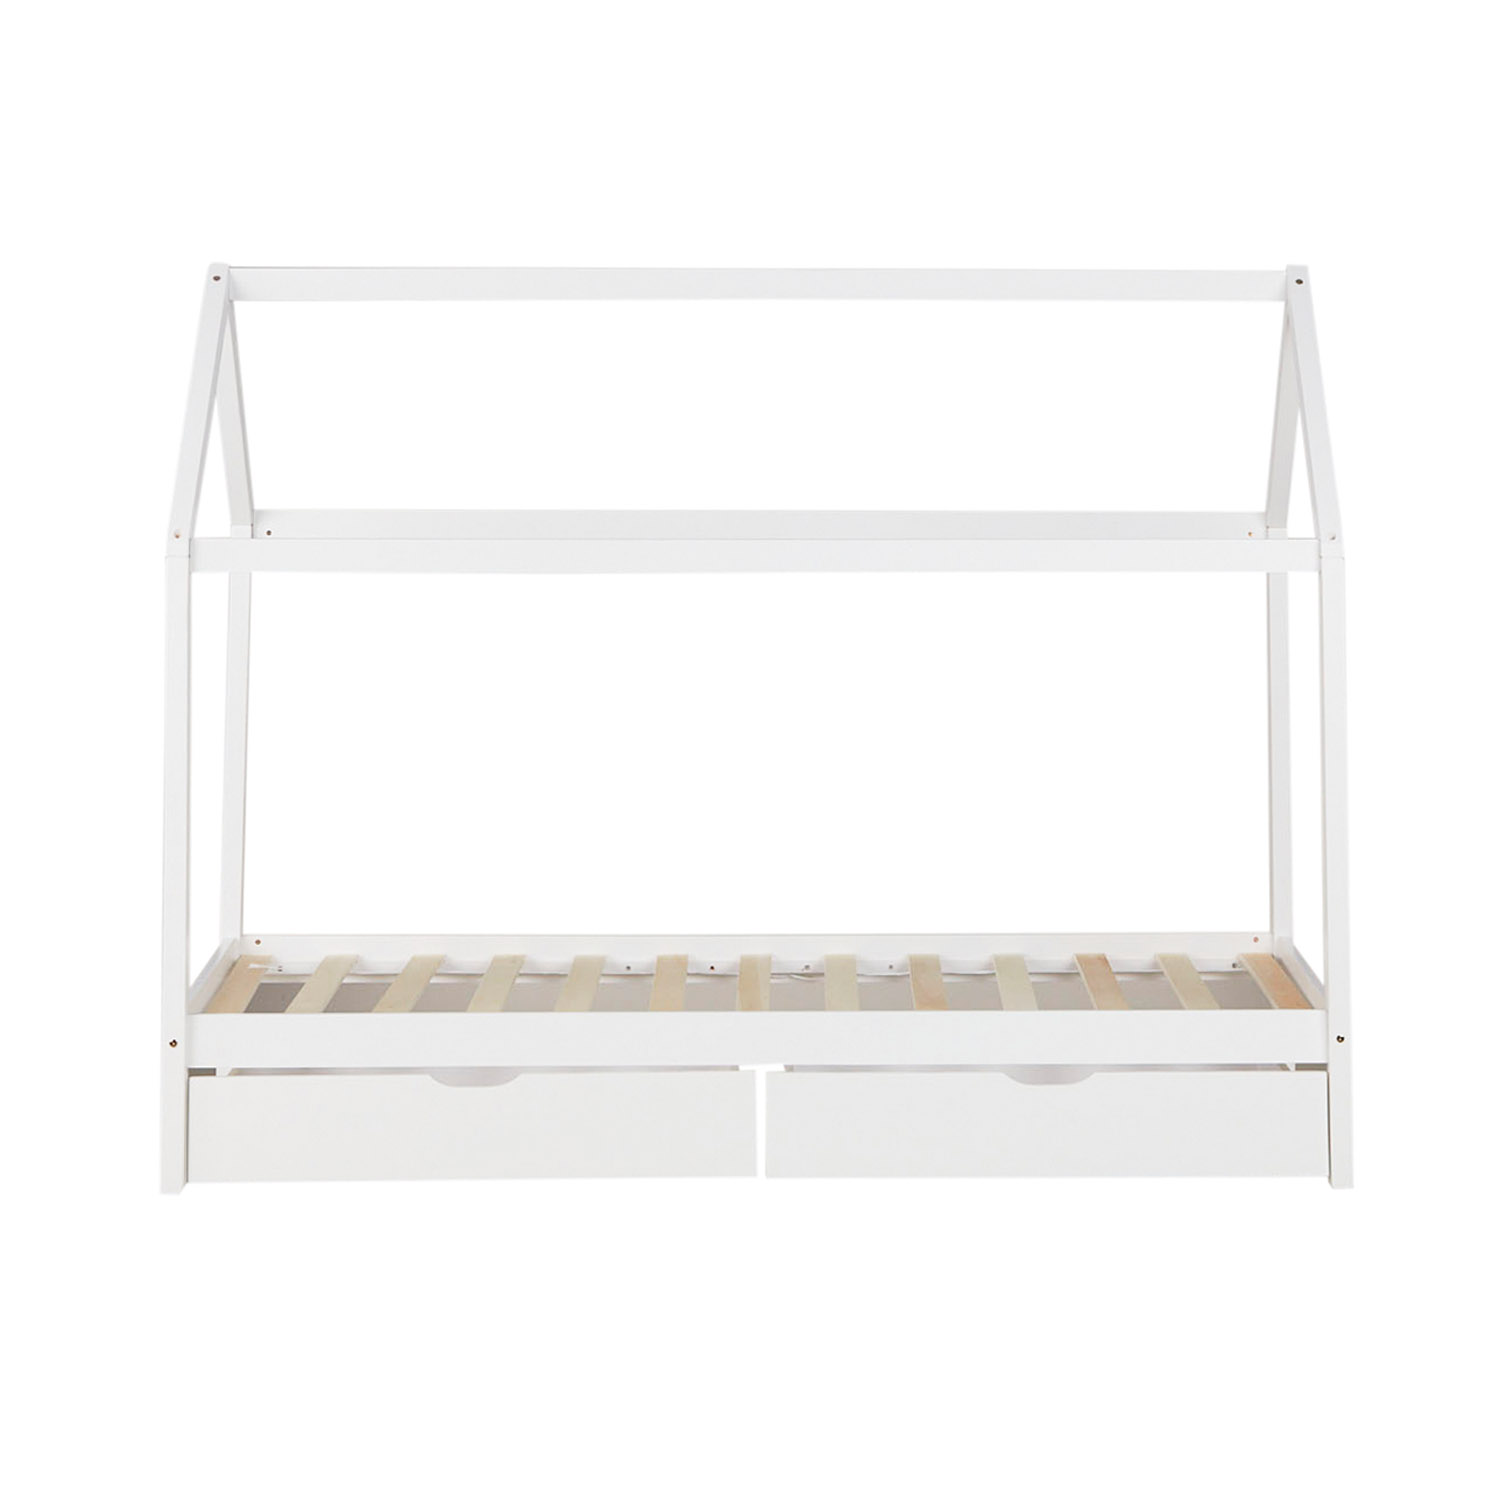 Childrens Bed House Bed Frame For Kids 90x200 cm White With Drawers